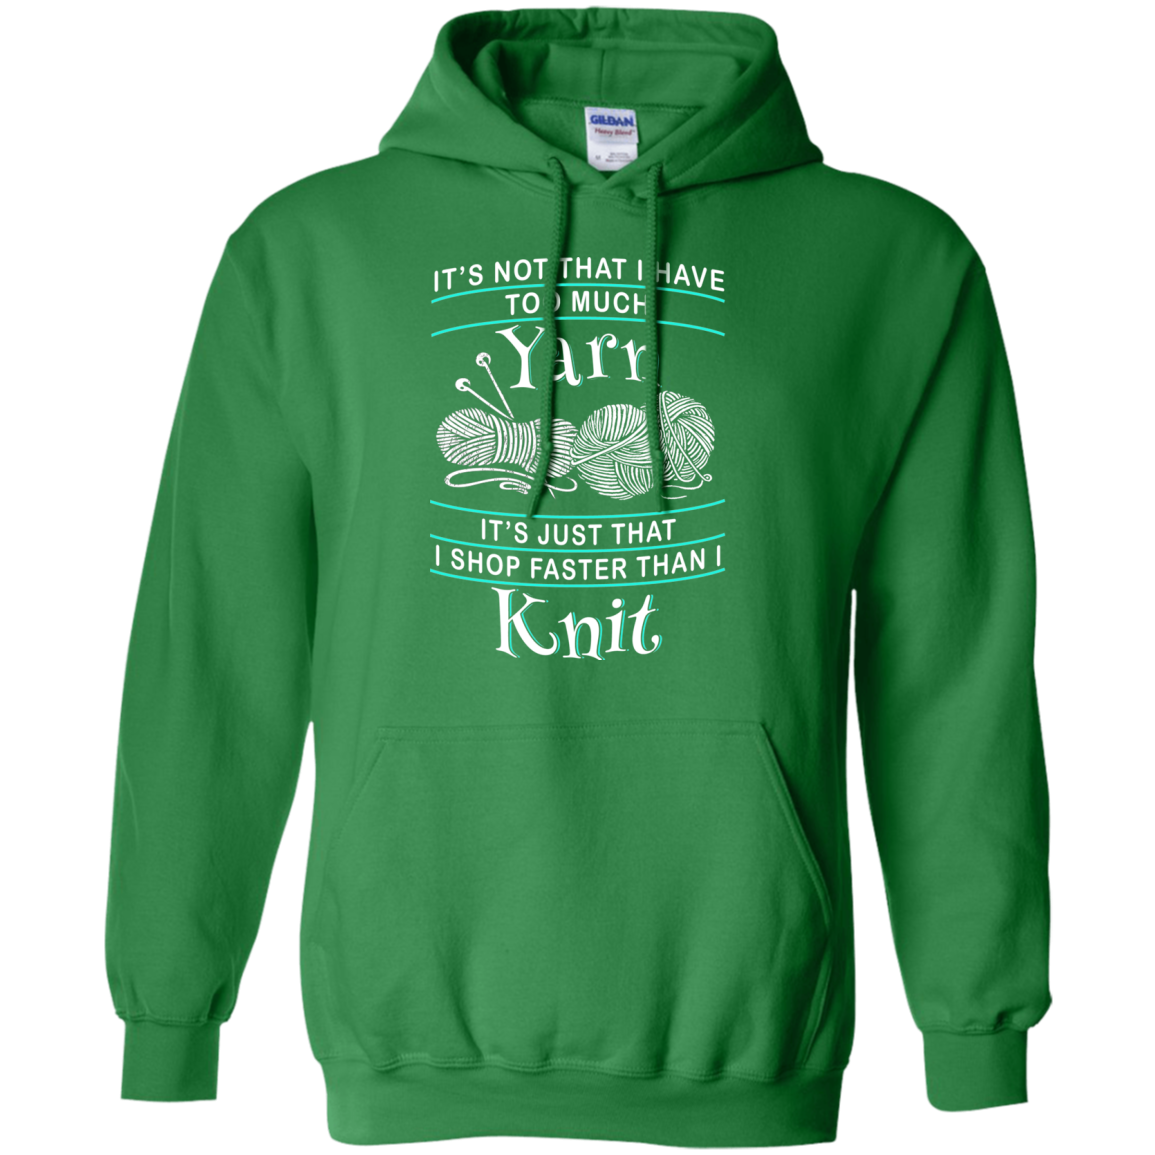 I Shop Faster than I Knit Pullover Hoodie